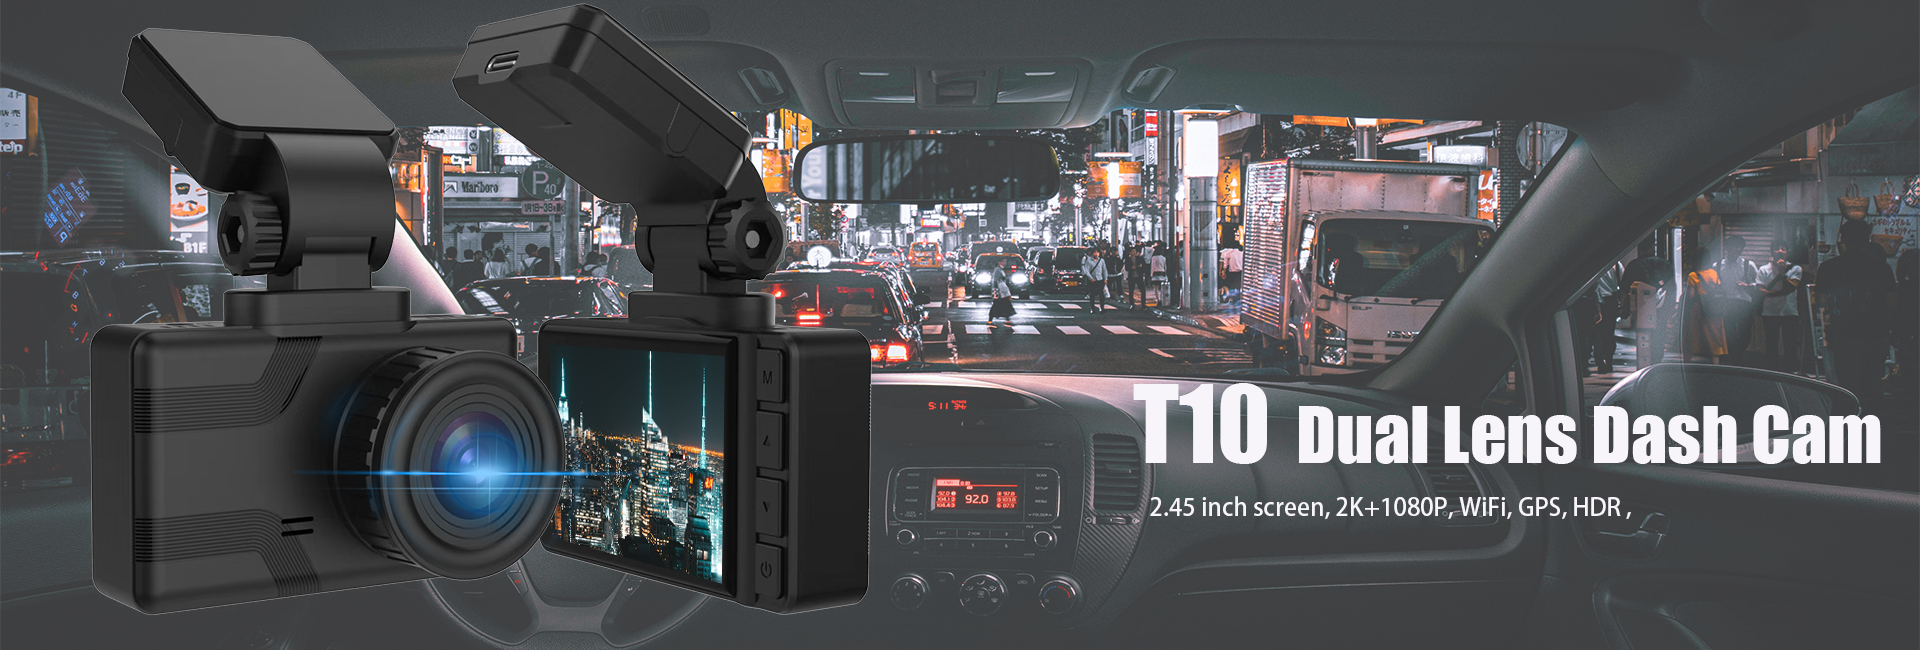 T10 Dual Lens Dash Cam 2K+1080P With HDR function